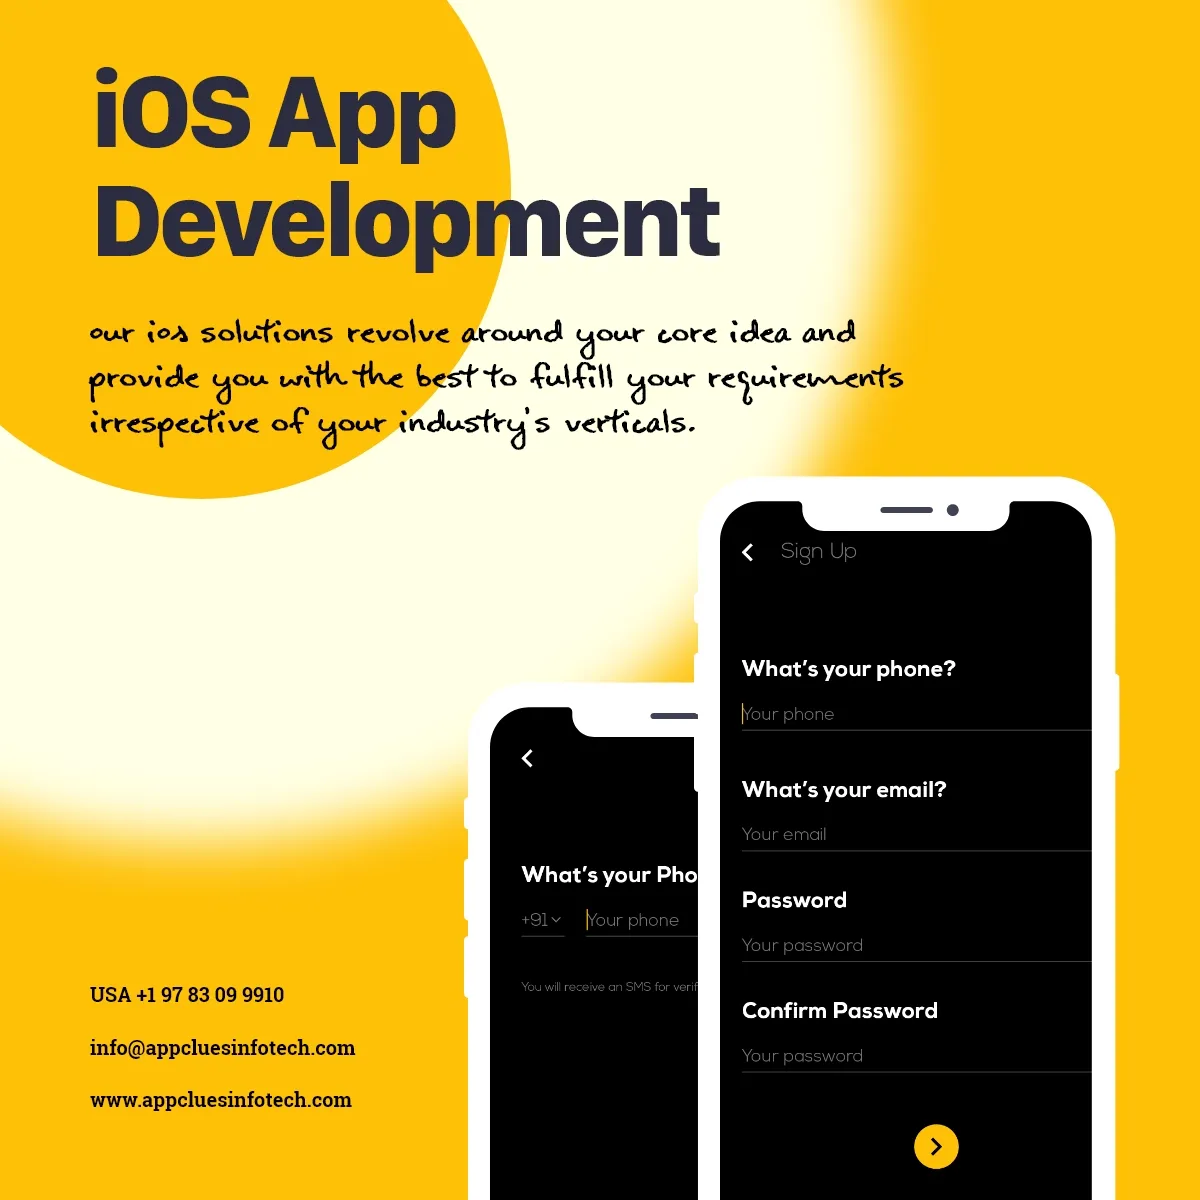 Top-Notch iPhone App Development Services in USA